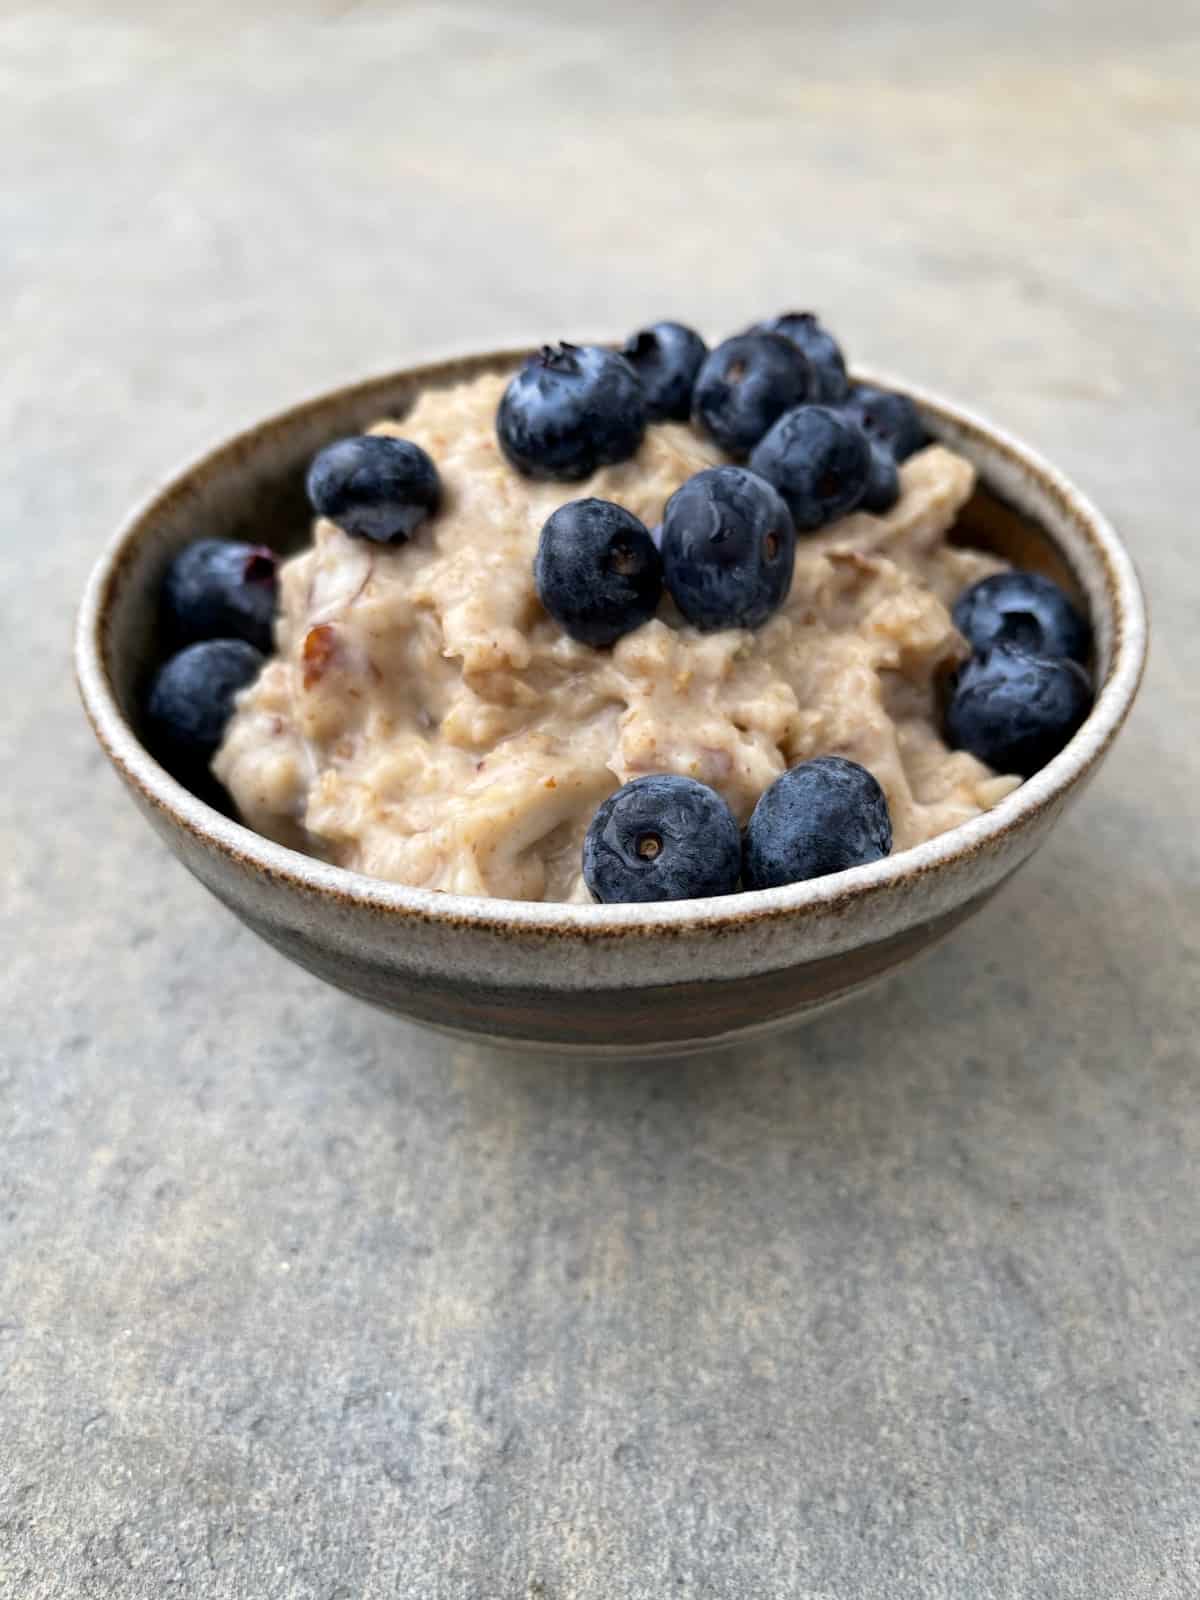 Slow cooker almond date oatmeal topped with fresh blueberries in ceramic bowl.